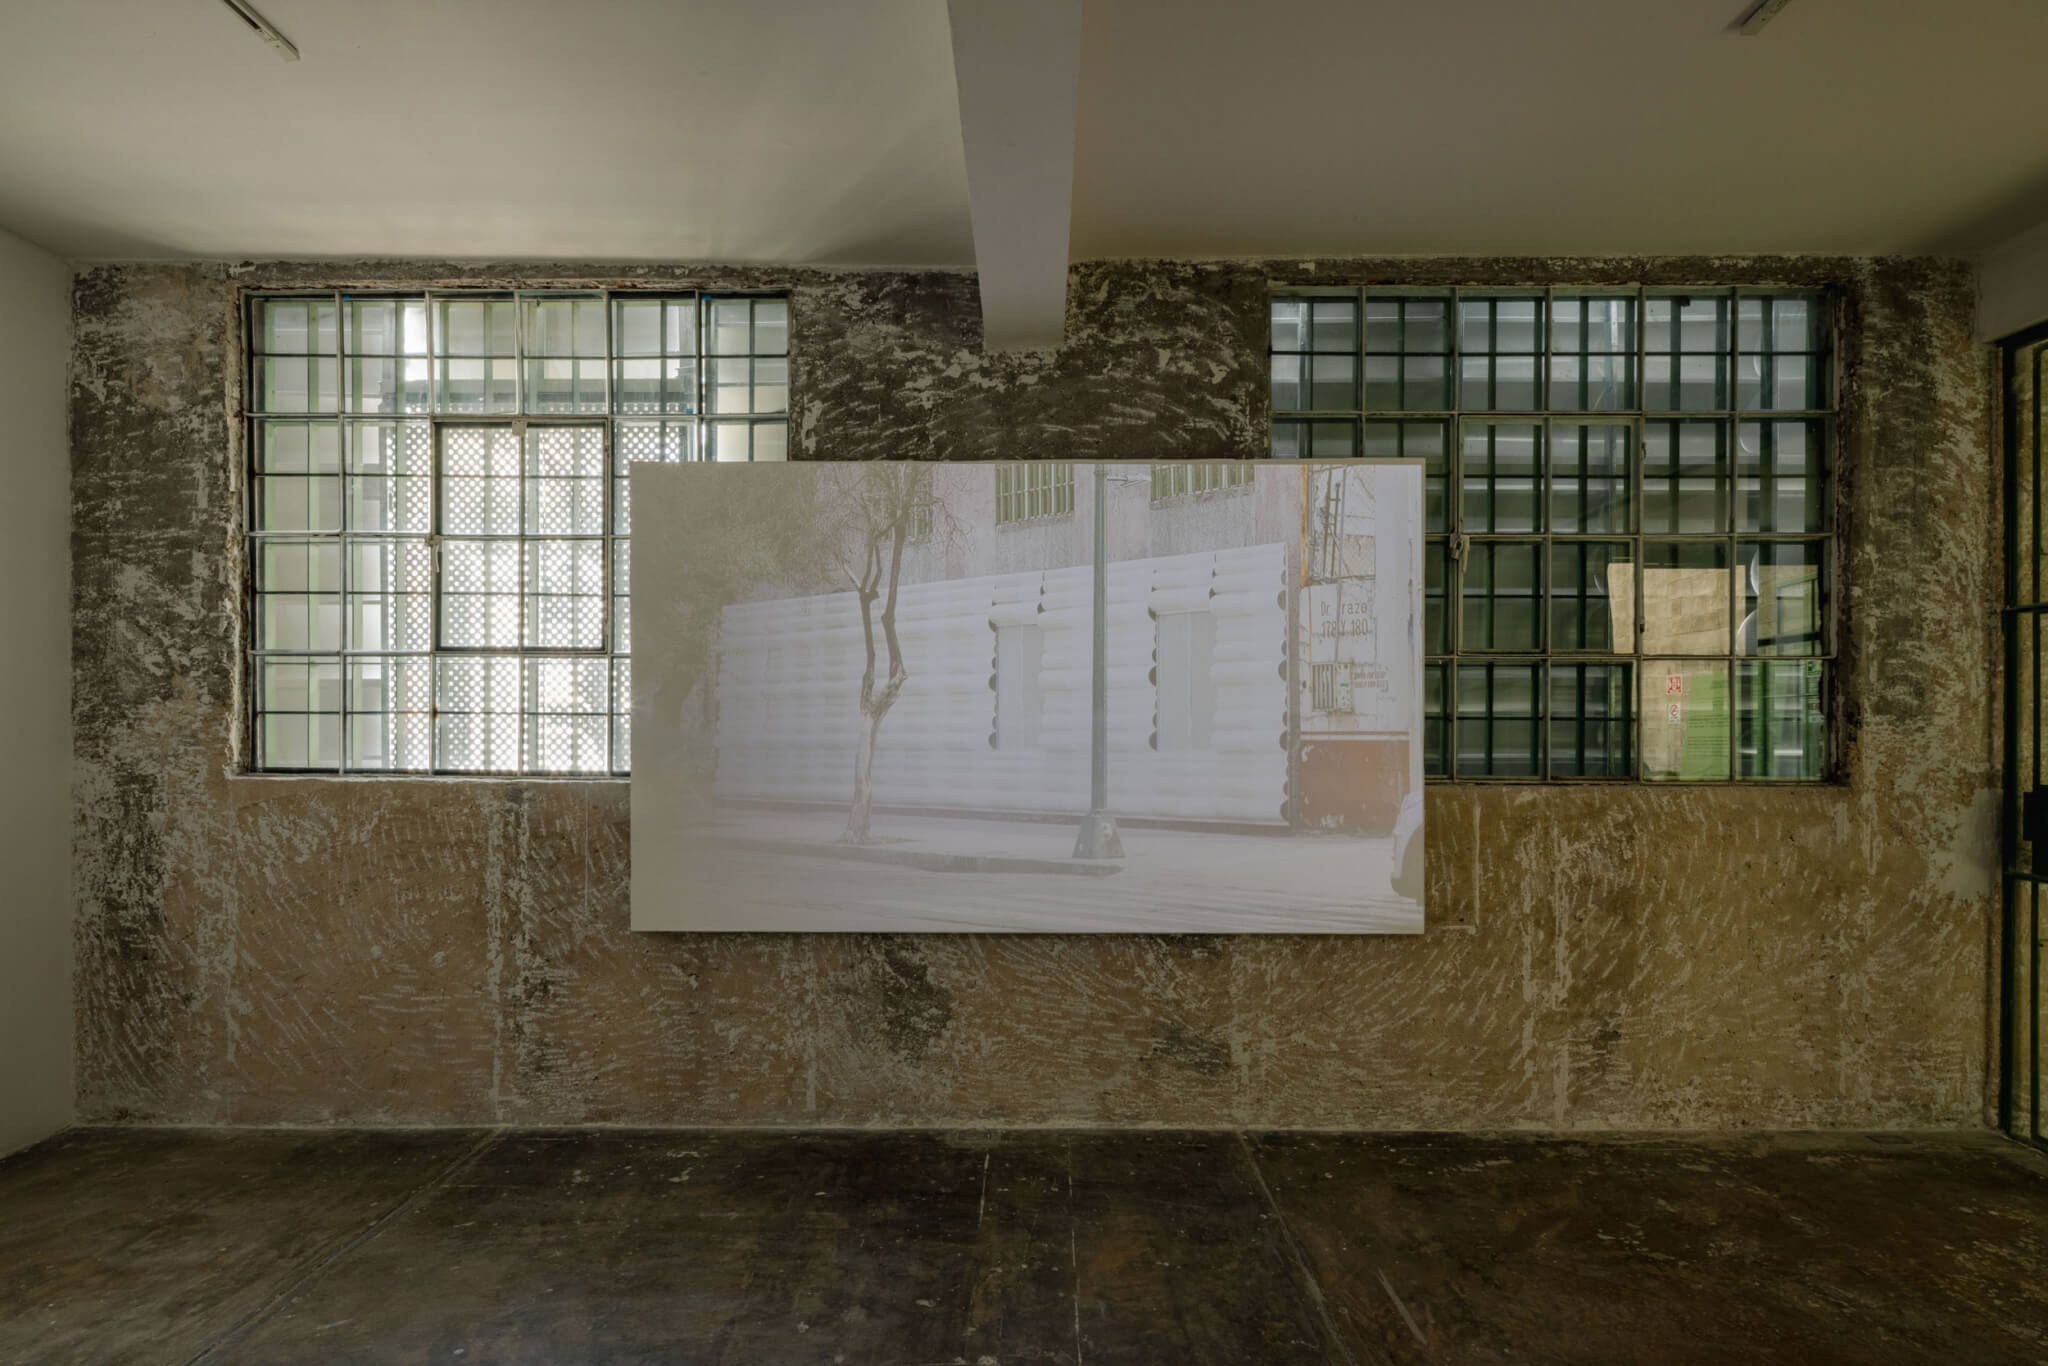 Room with two windows with the view obstructed by an object outside. A screen is in the middle of the room with an image of the outside's facade projected unto it.